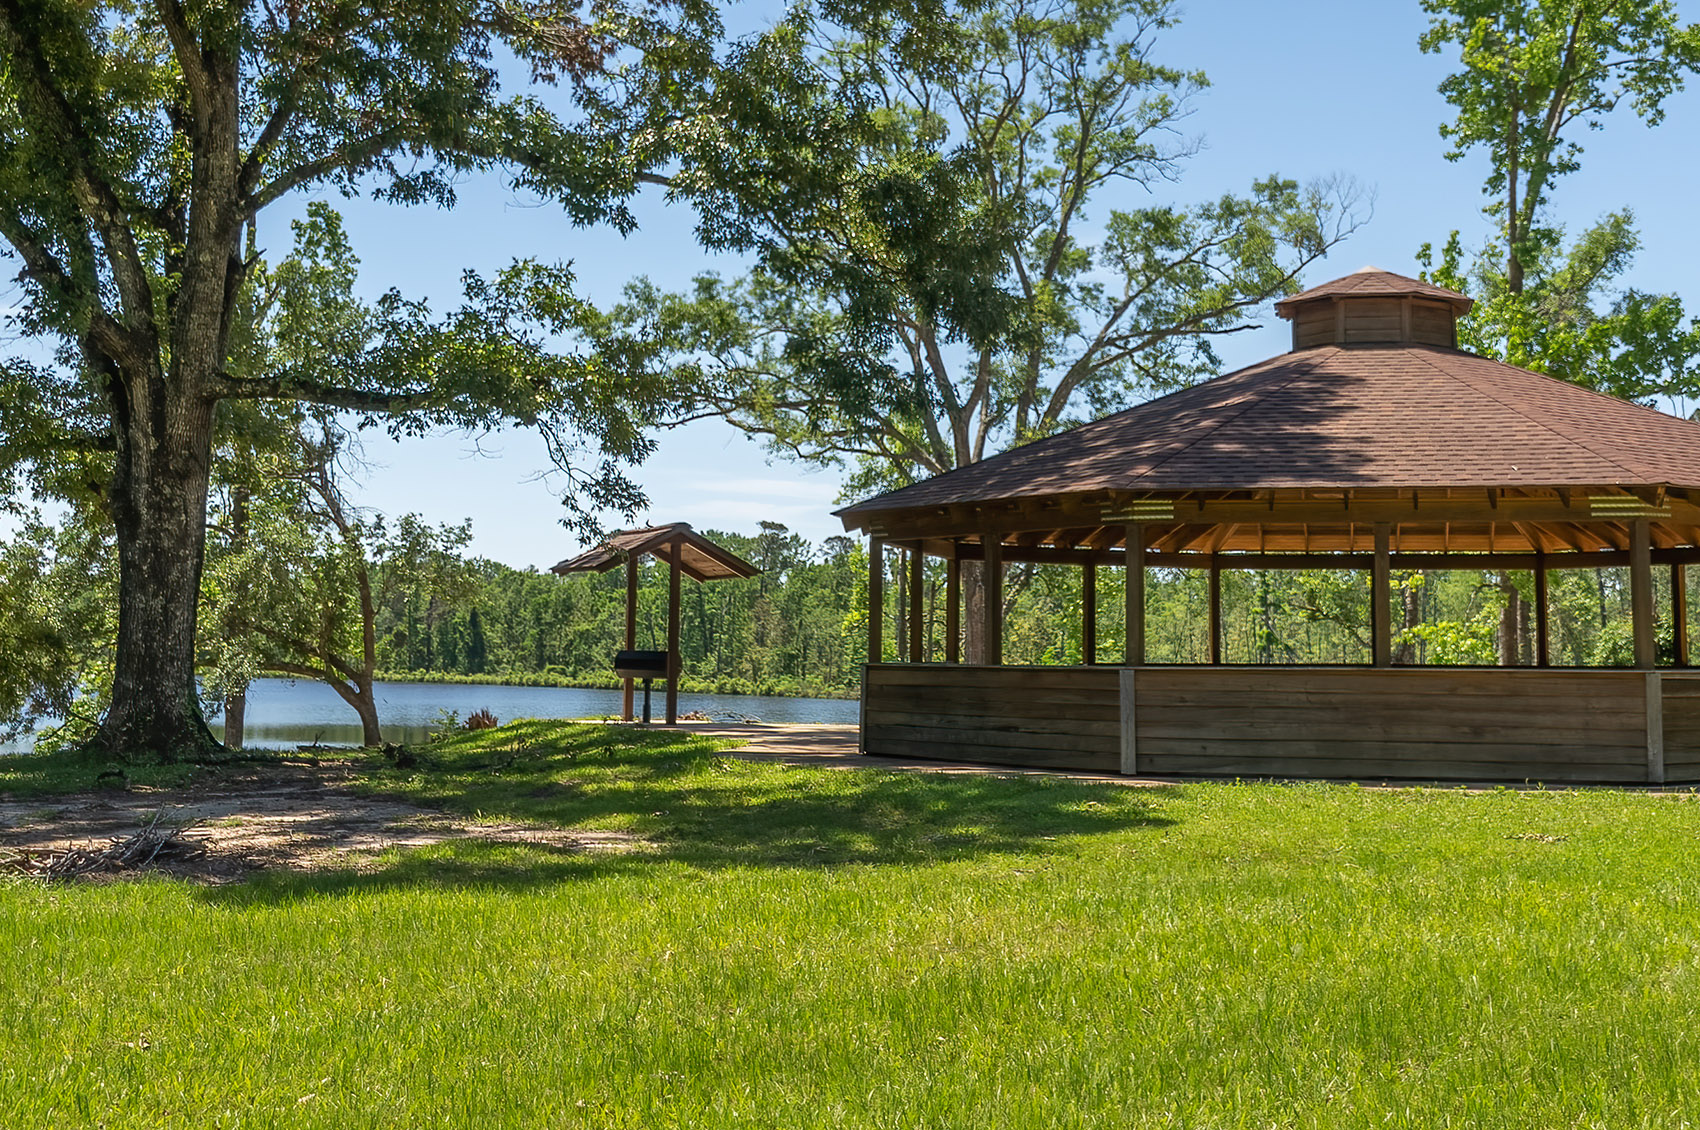 Pavilion and pond at site of Louisiana sawmill at Fullerton